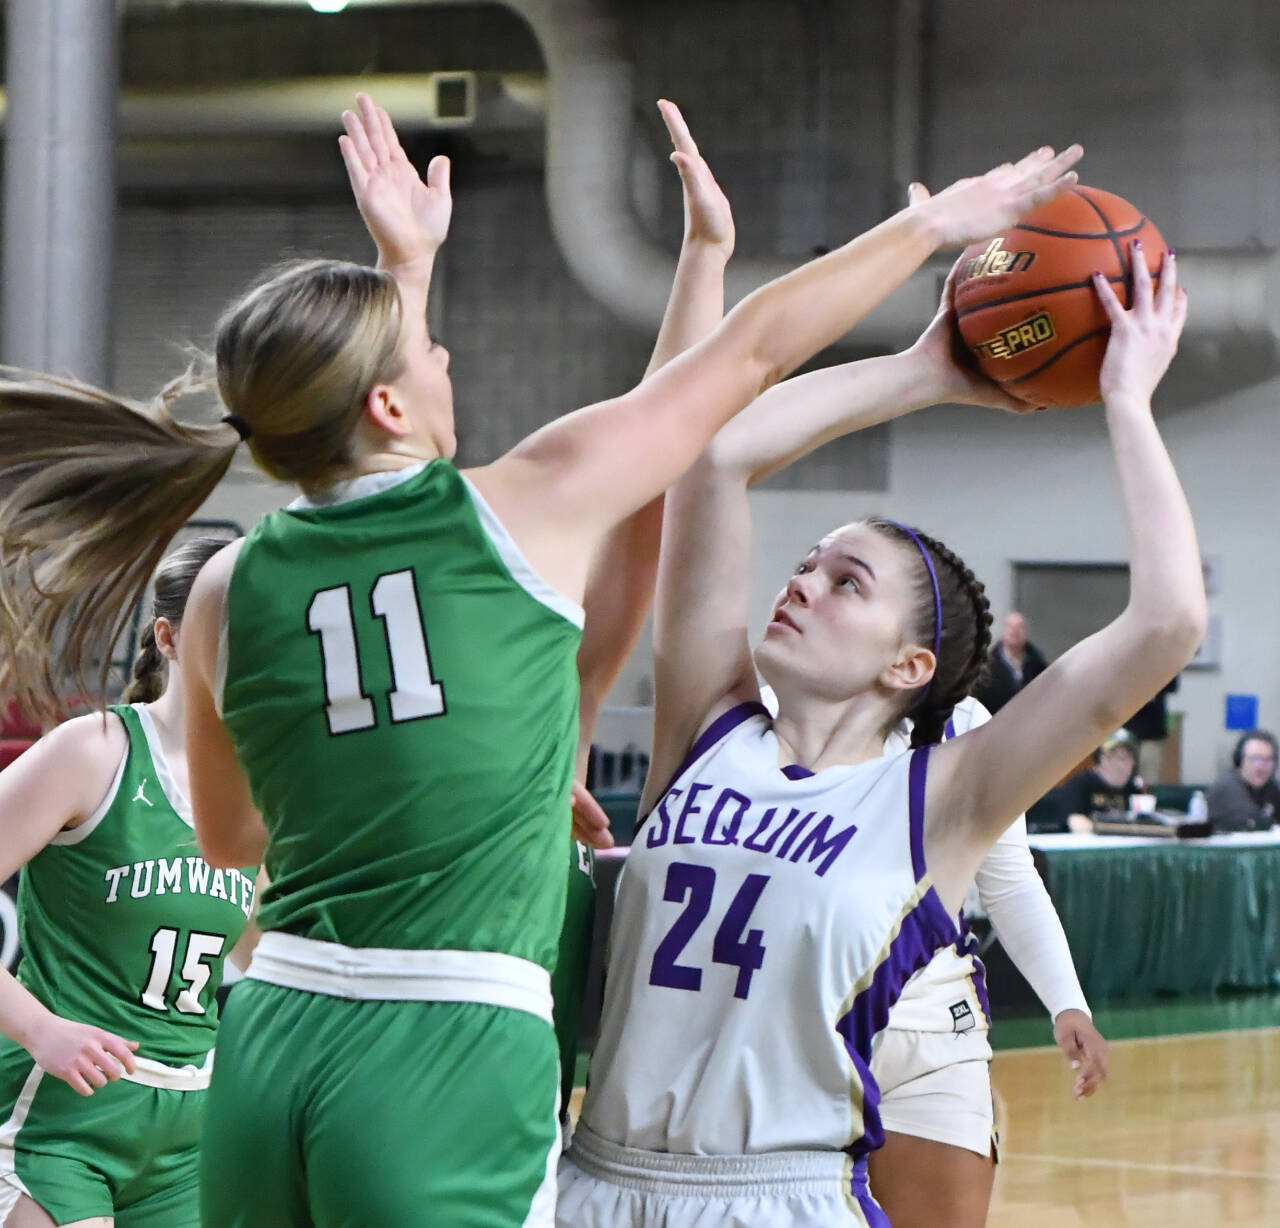 Photo by Jim Heintz / Sequim’s Dani Herman, right, looks to put up a shot over Tumwater’s Kylie Waltermeyer in the Wolves’ 38-24 win over Tumwater at the class 2A state tournament in March.